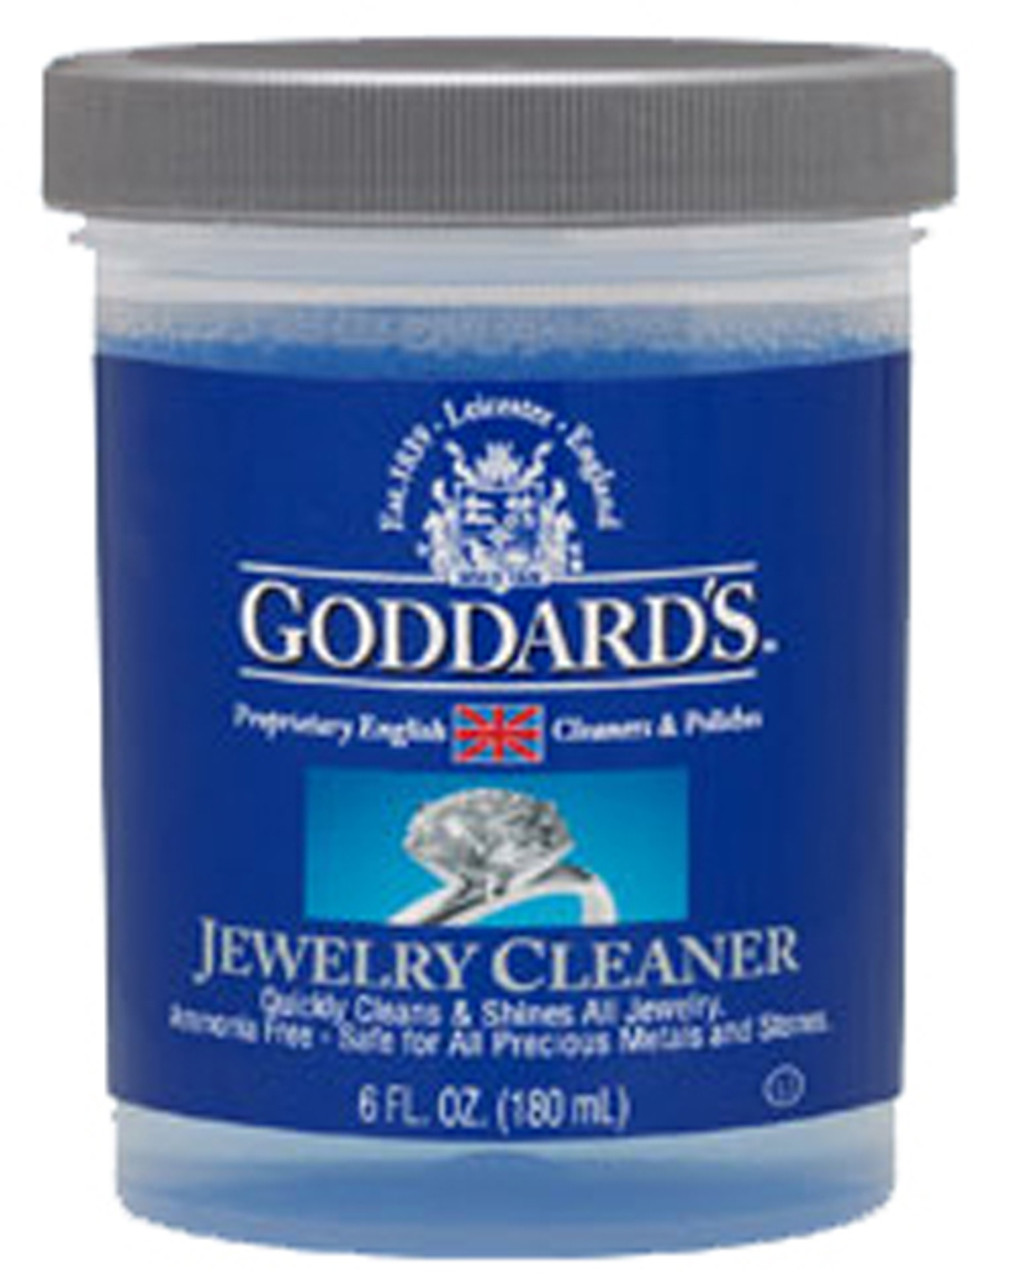 Jewellery Cleaner Care Kit